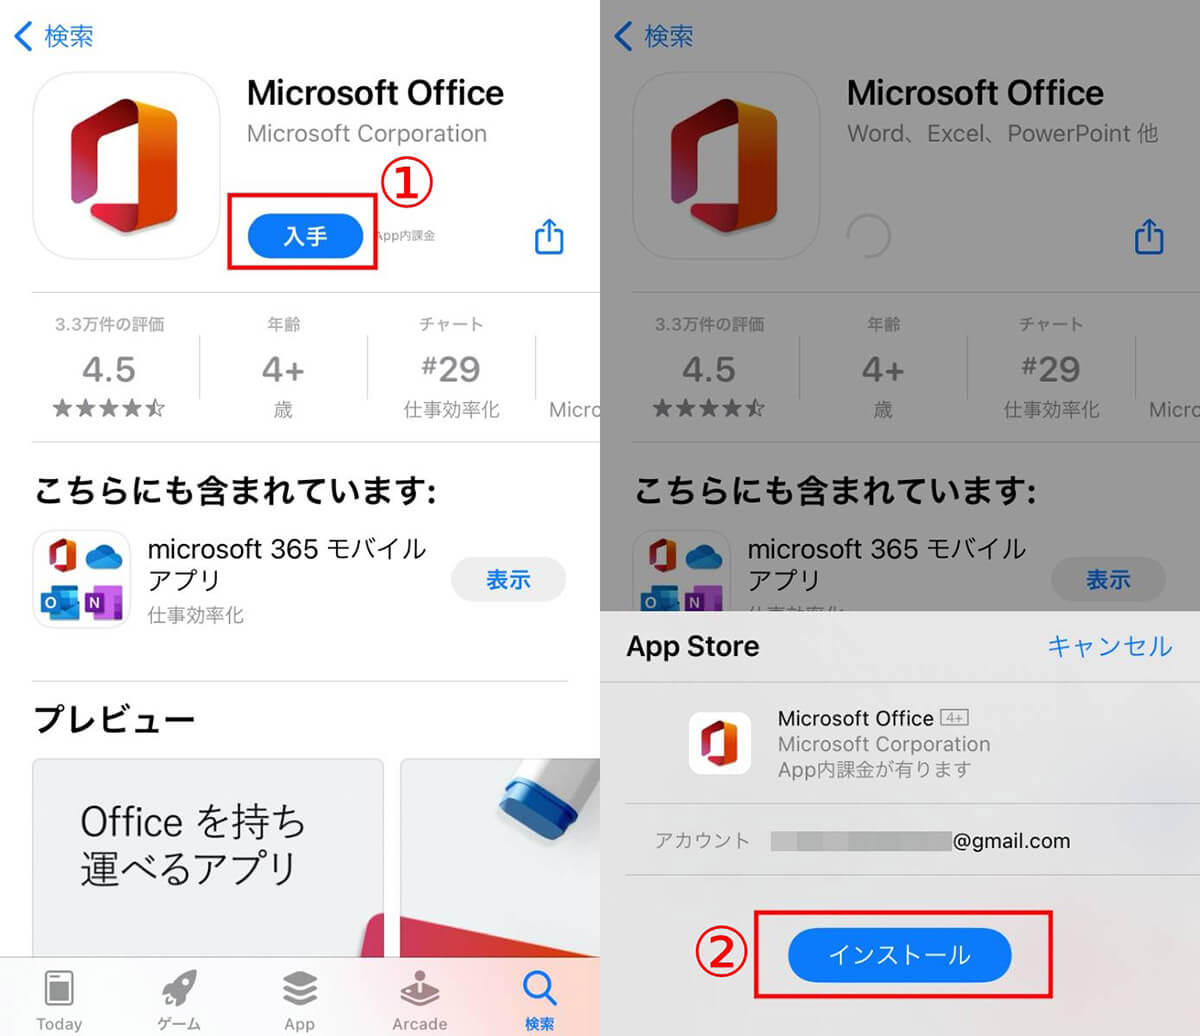 Word/Excel/PowerPointを統合した「Office」アプリも登場1